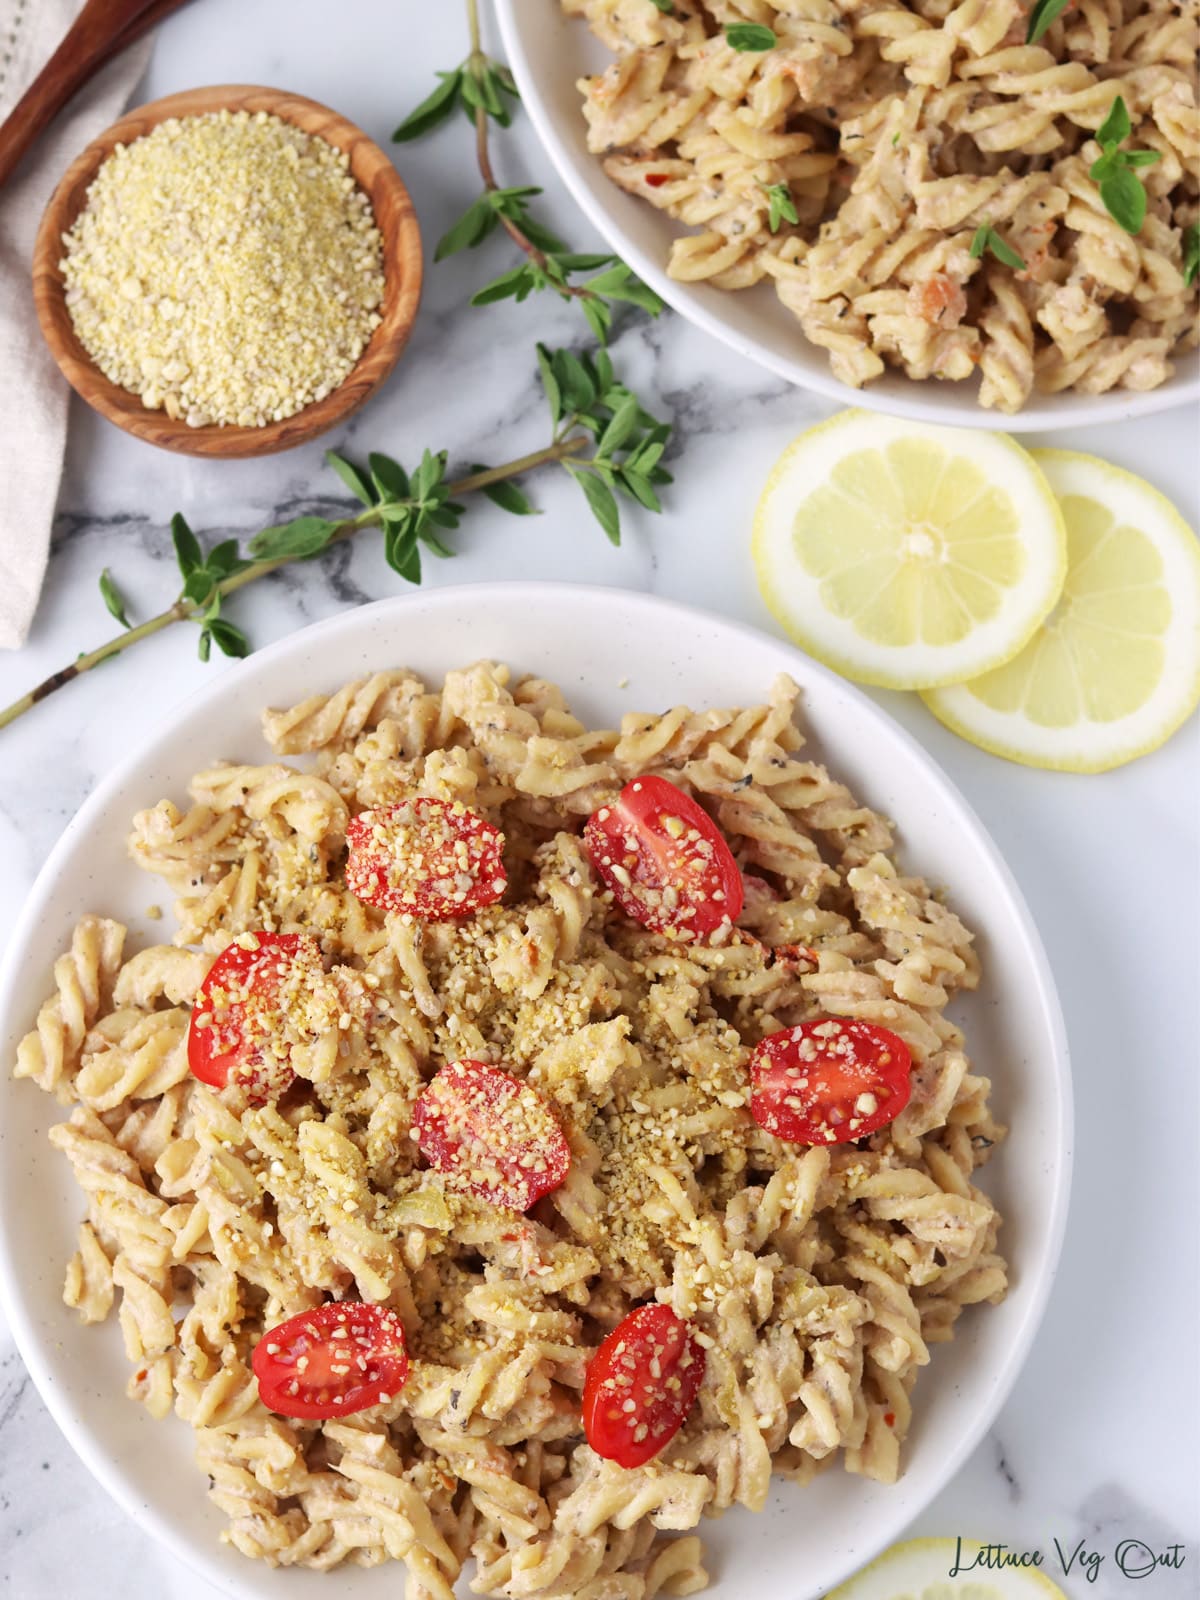 Plate of rotini pasta with creamy tahini sauce, topped with cherry tomatoes and vegan parmesan cheese.